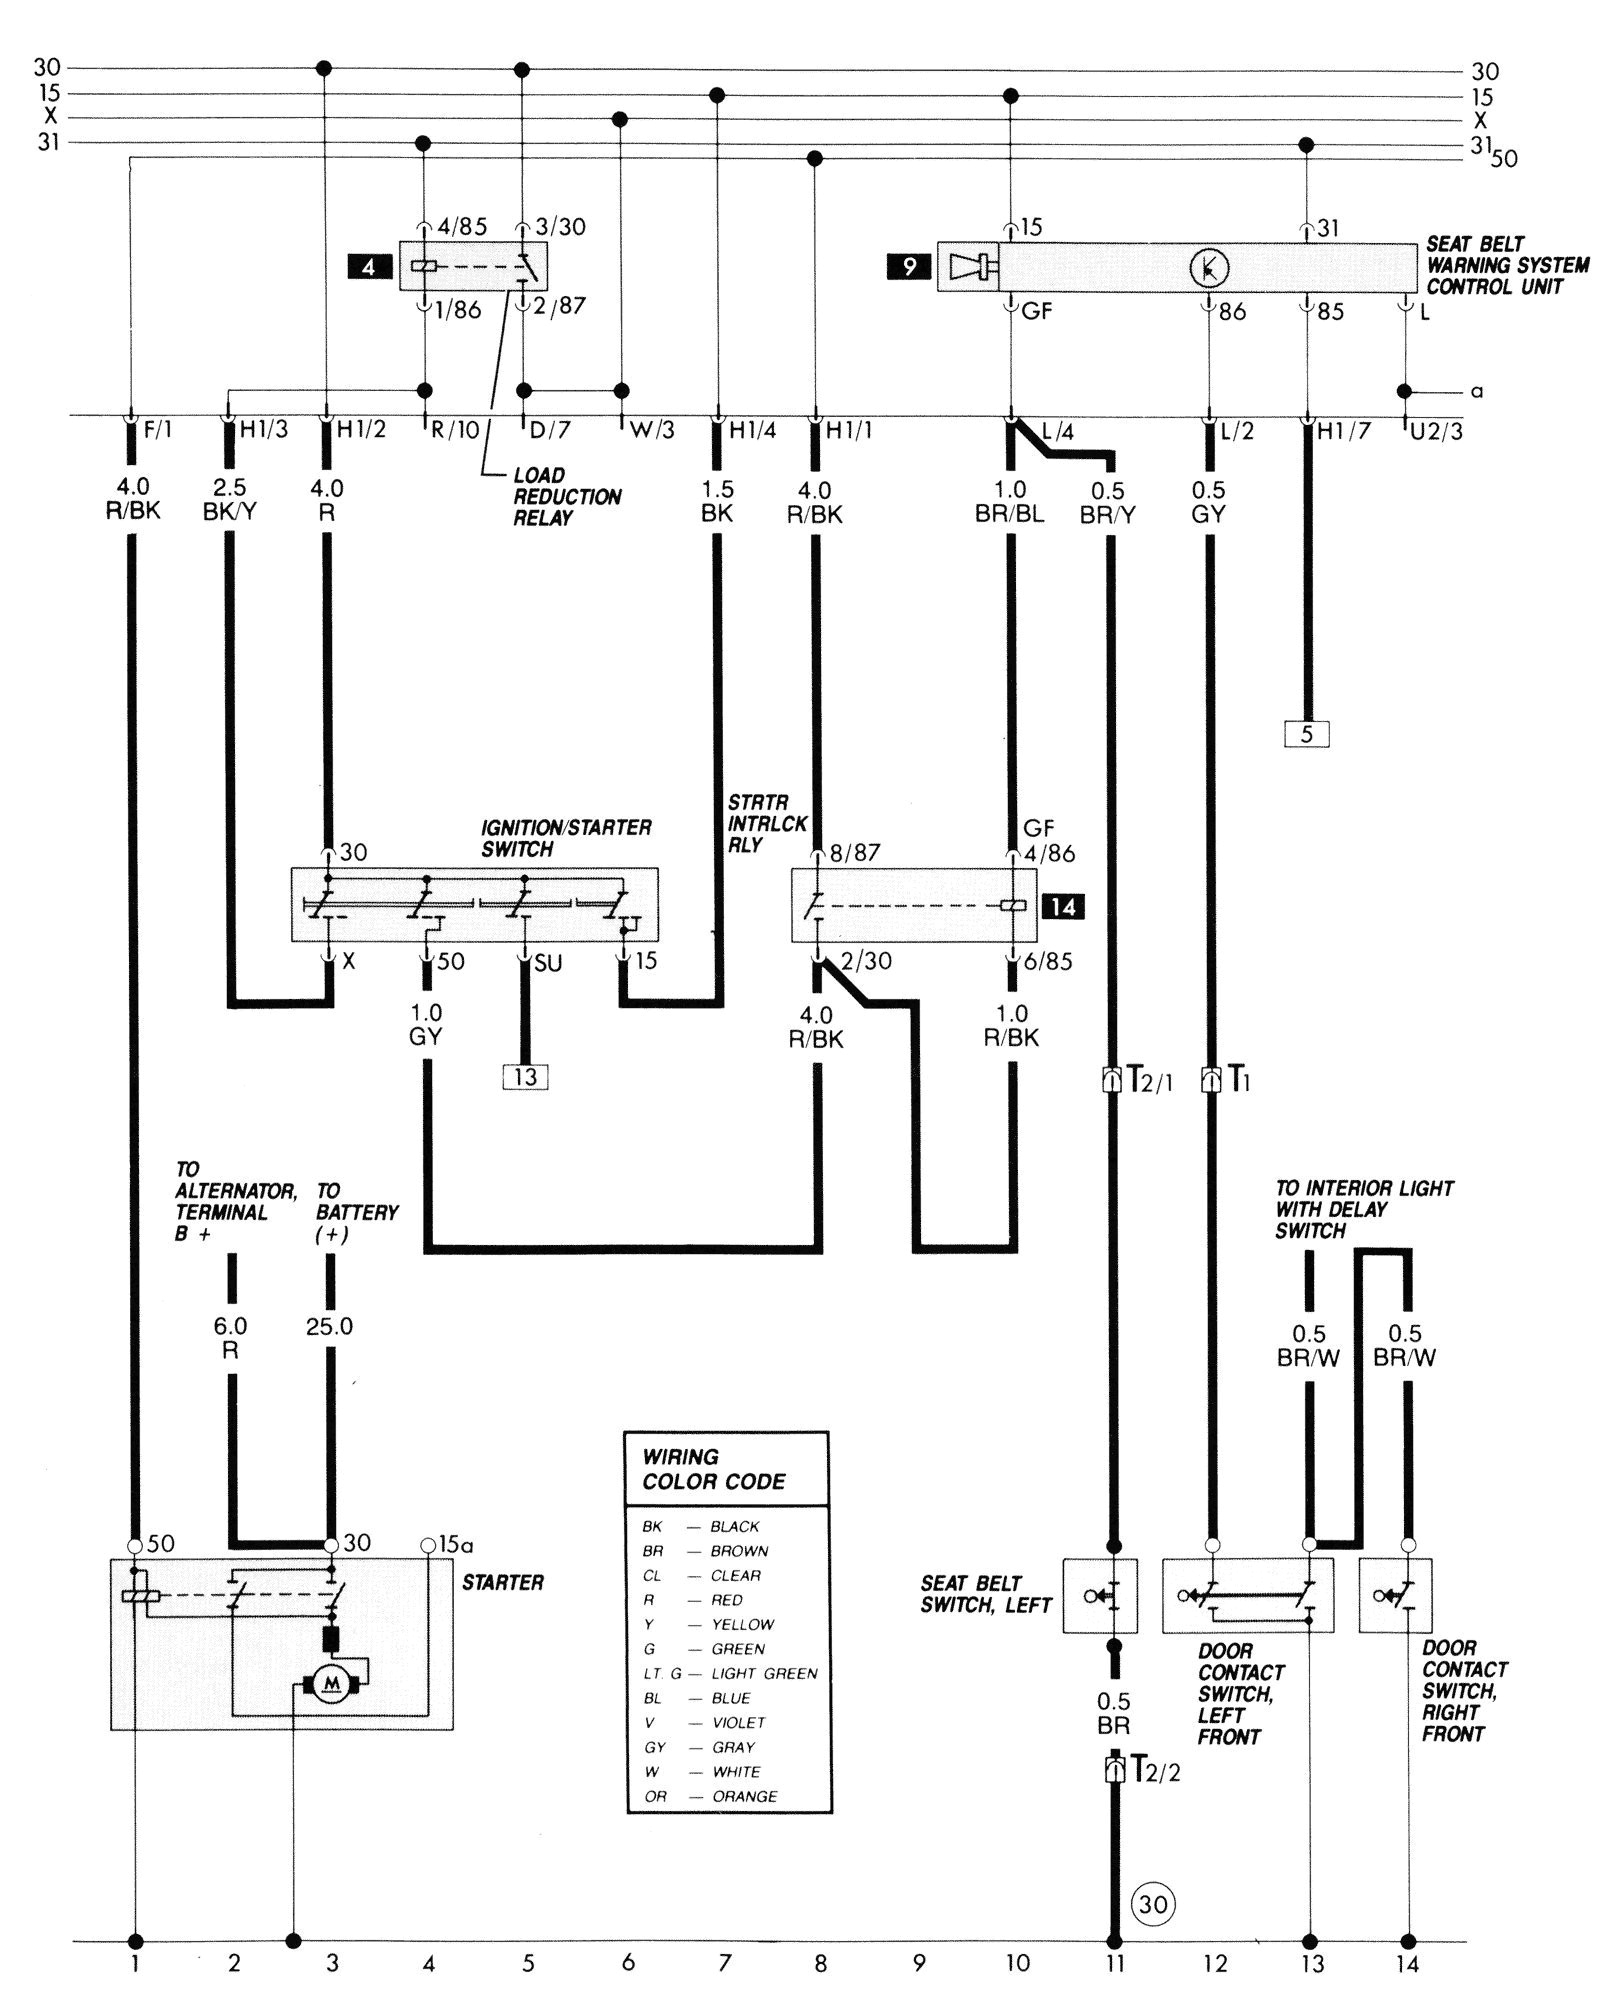 1990 volkswagen jetta wiring diagram wiring diagram listcom in need of a starting circut diagram for